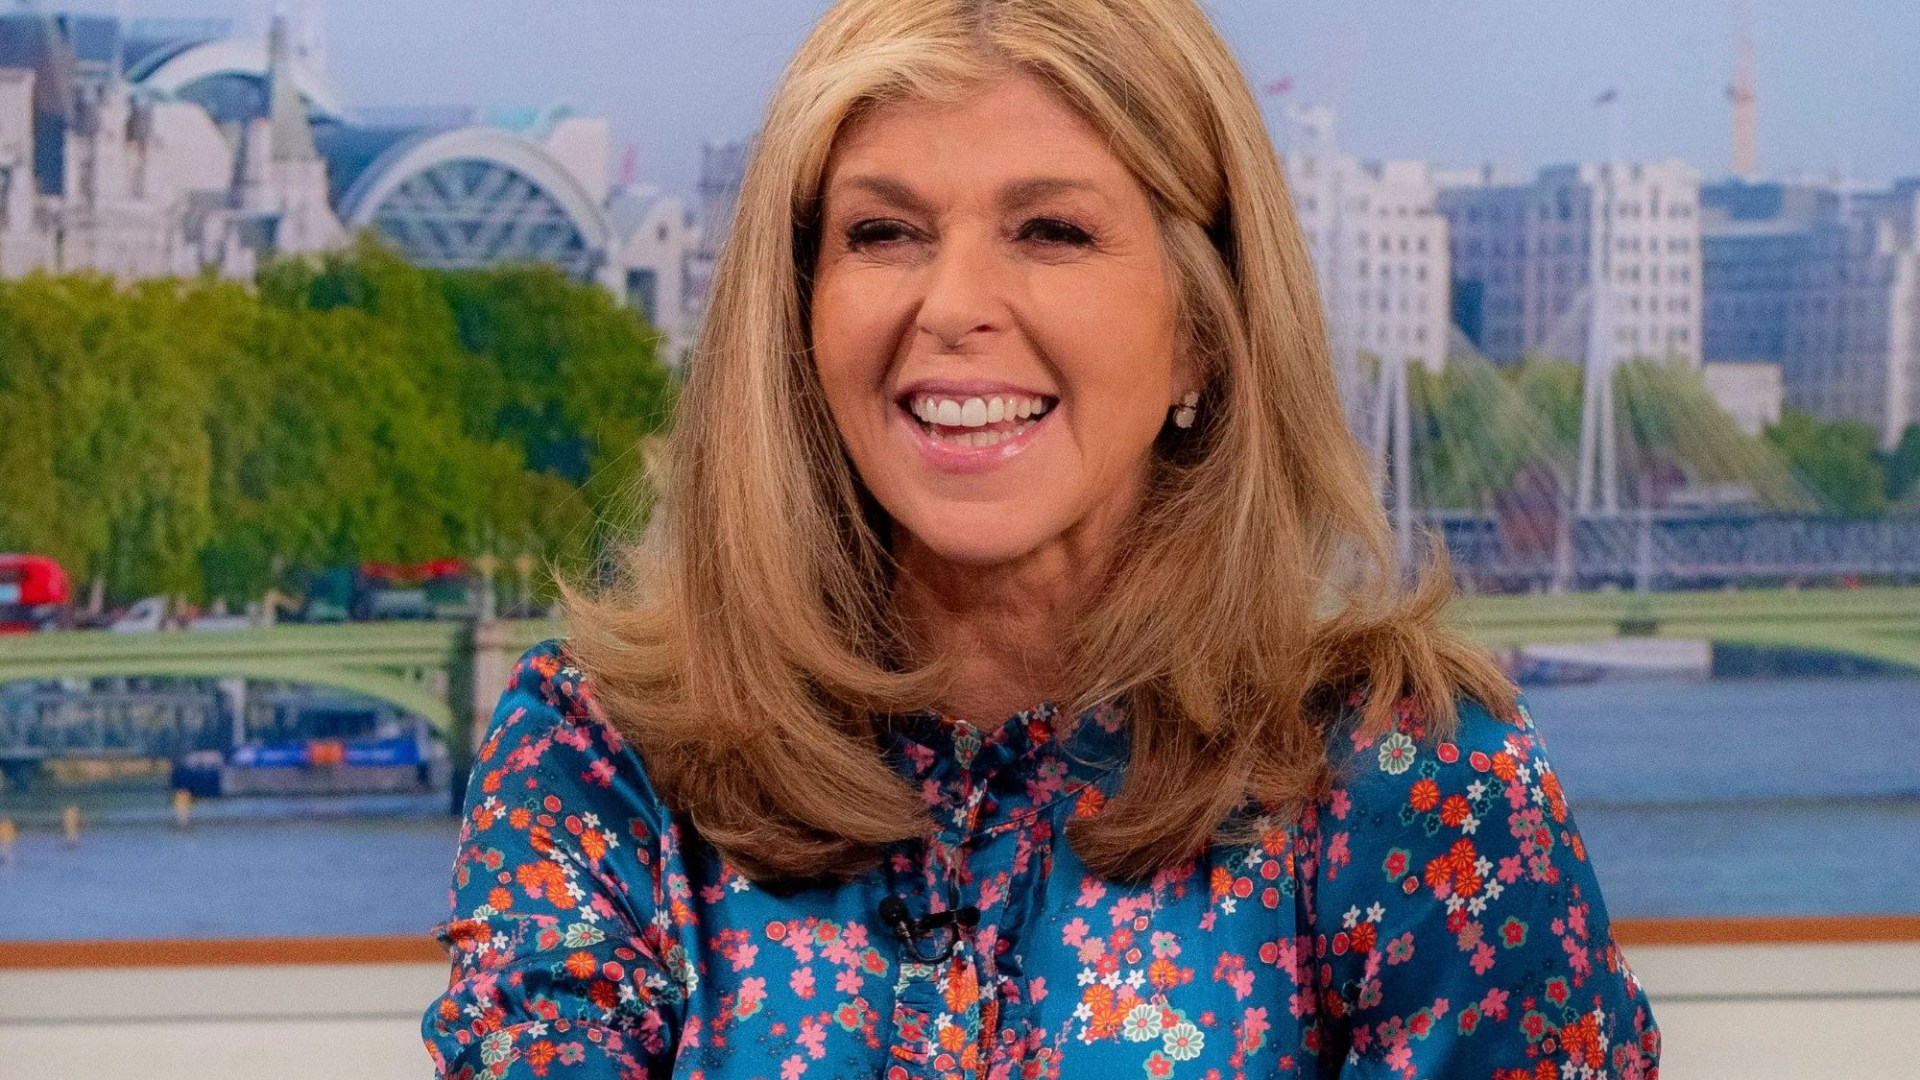 Kate Garraway replaced again in Good Morning Britain hosting shake up after her dad’s medical emergency [Video]